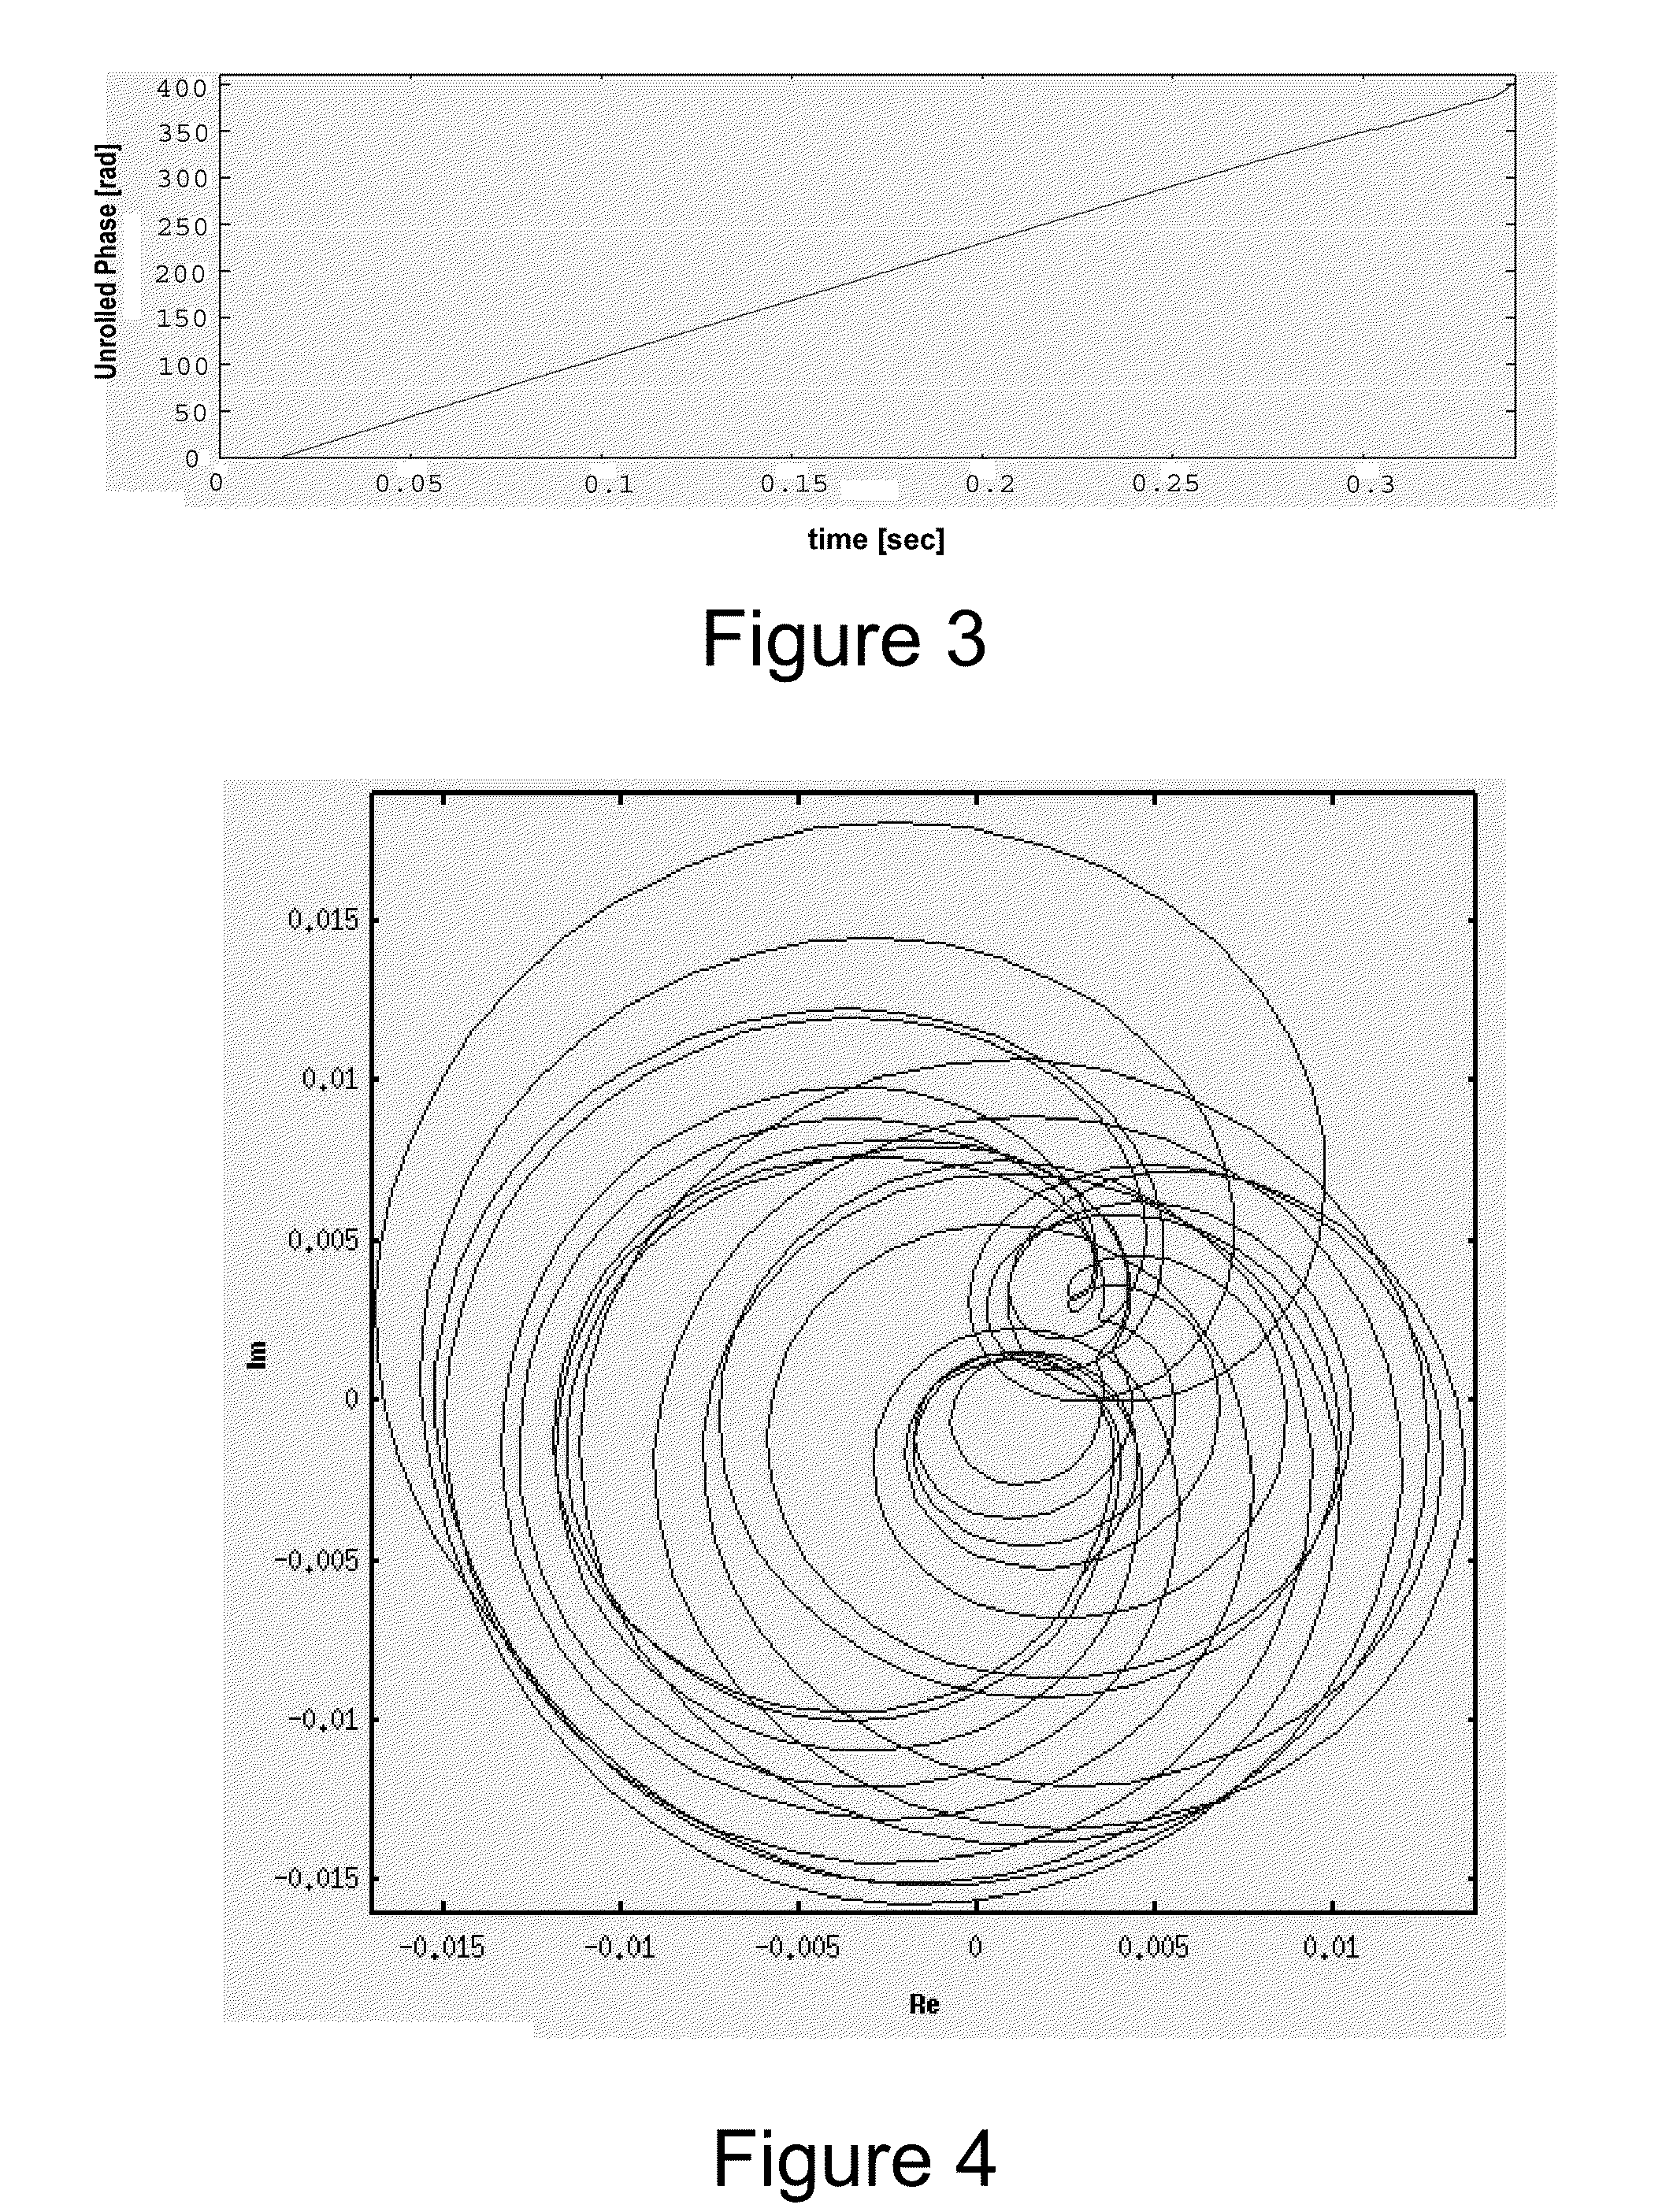 System-effected methods for analyzing, predicting, and/or modifying acoustic units of human utterances for use in speech synthesis and recognition